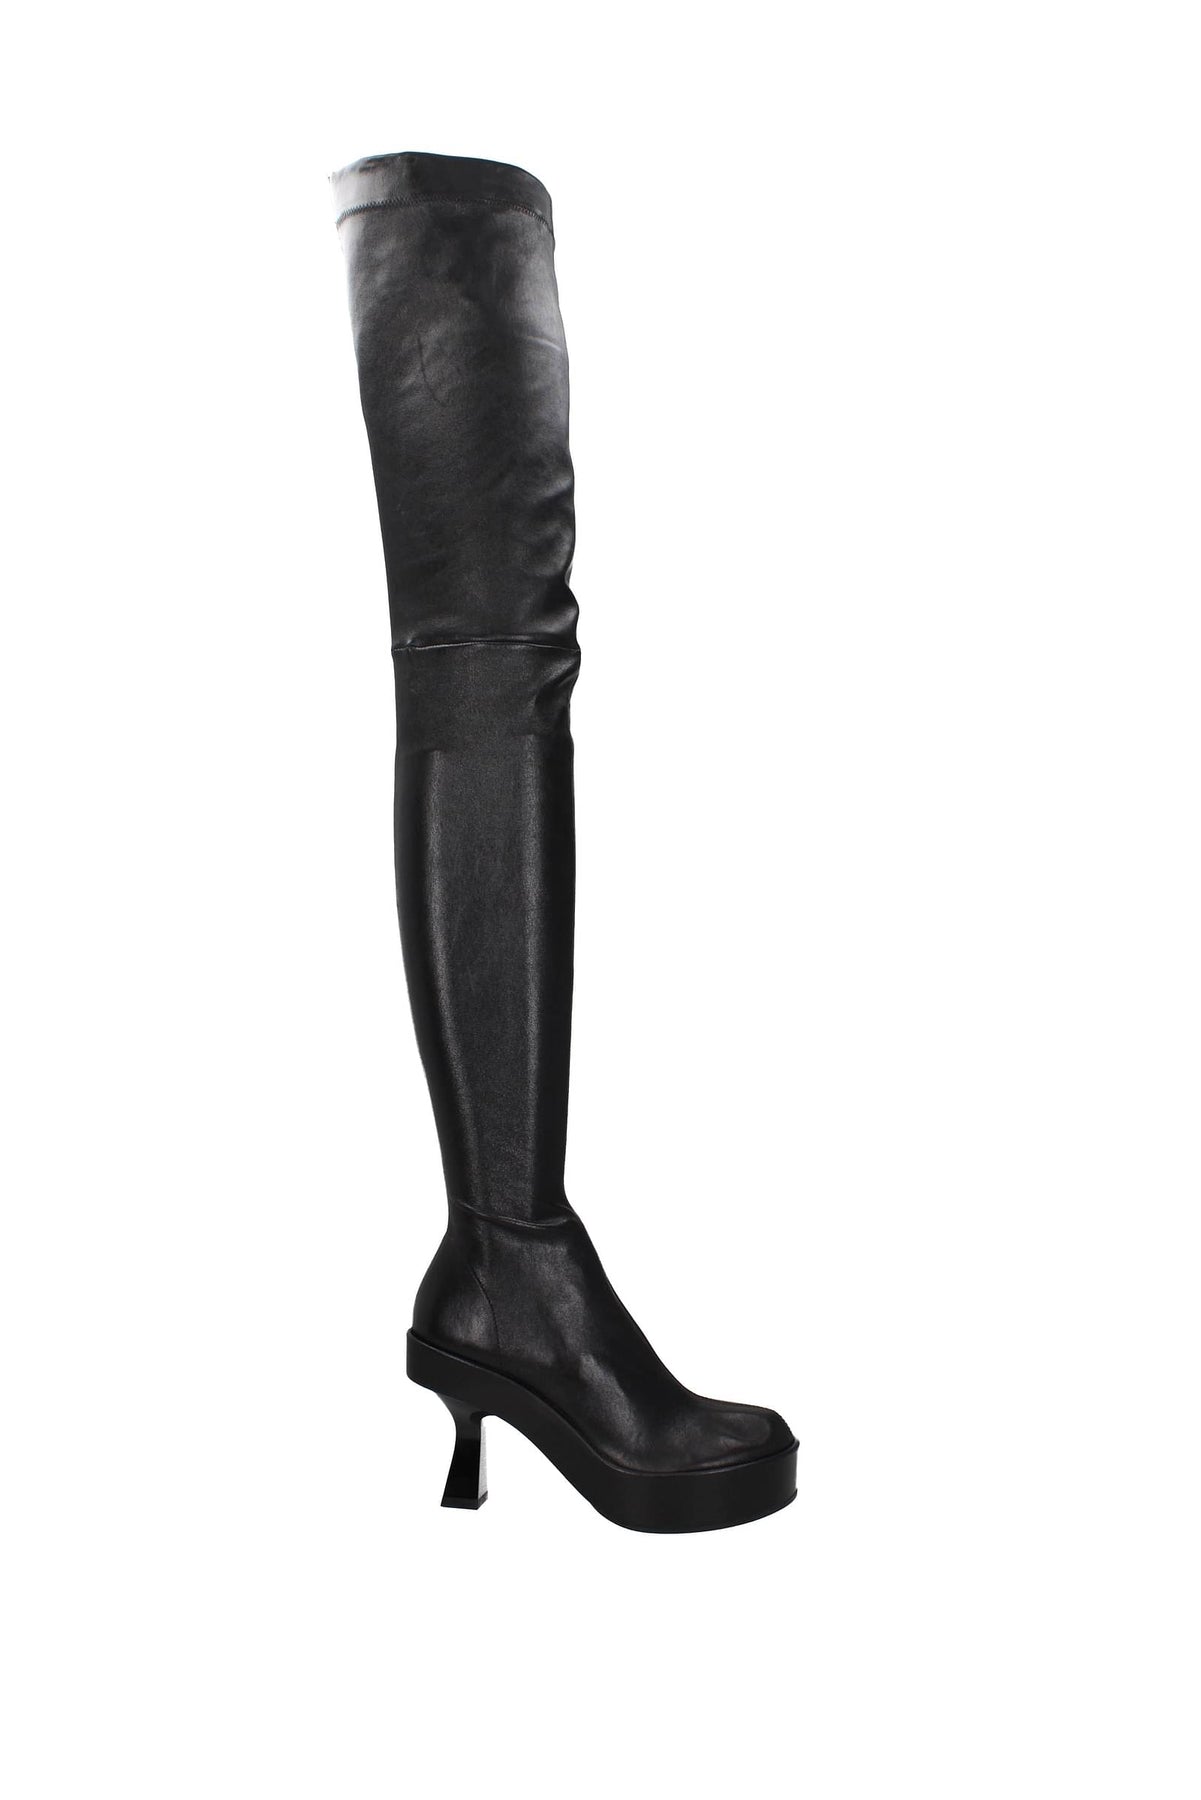 VERSACE BOOTS LEATHER BLACK